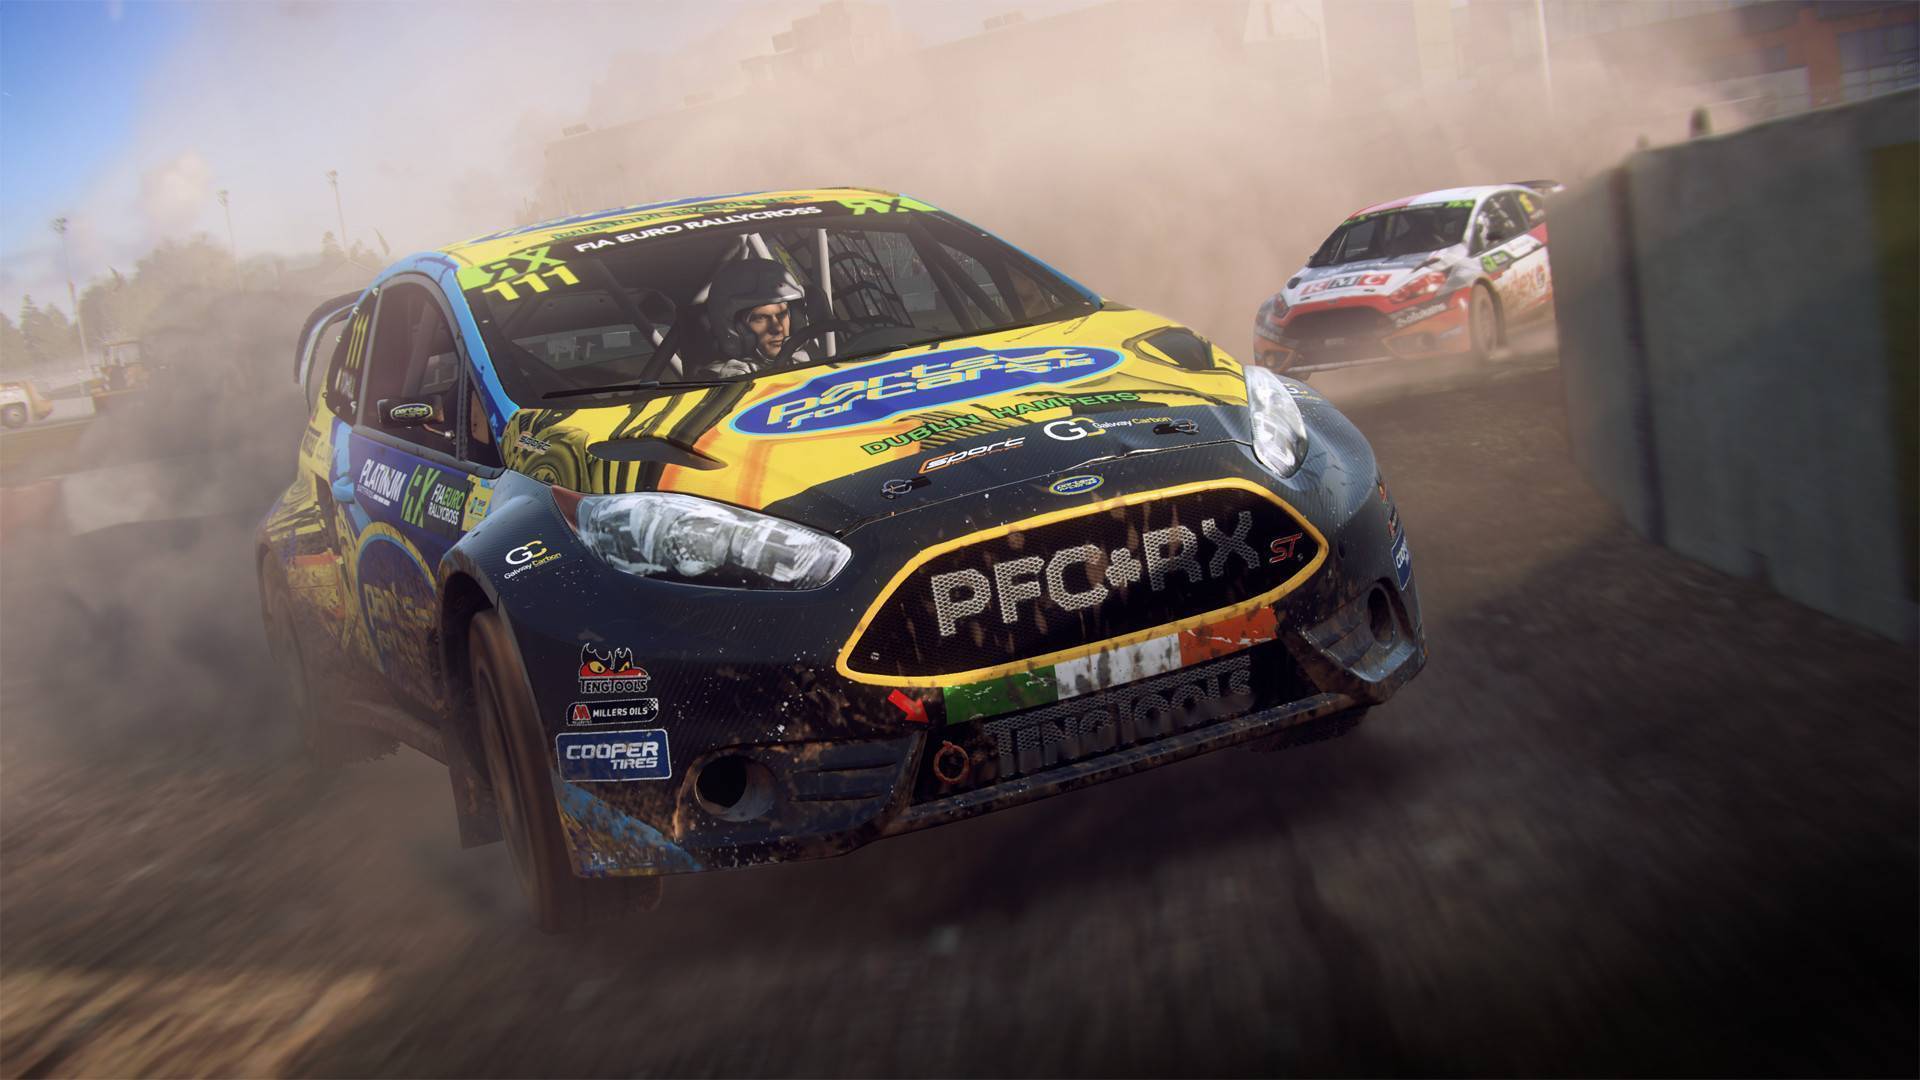 DiRT Rally 2.0 (PS4) cheap - Price of $8.55